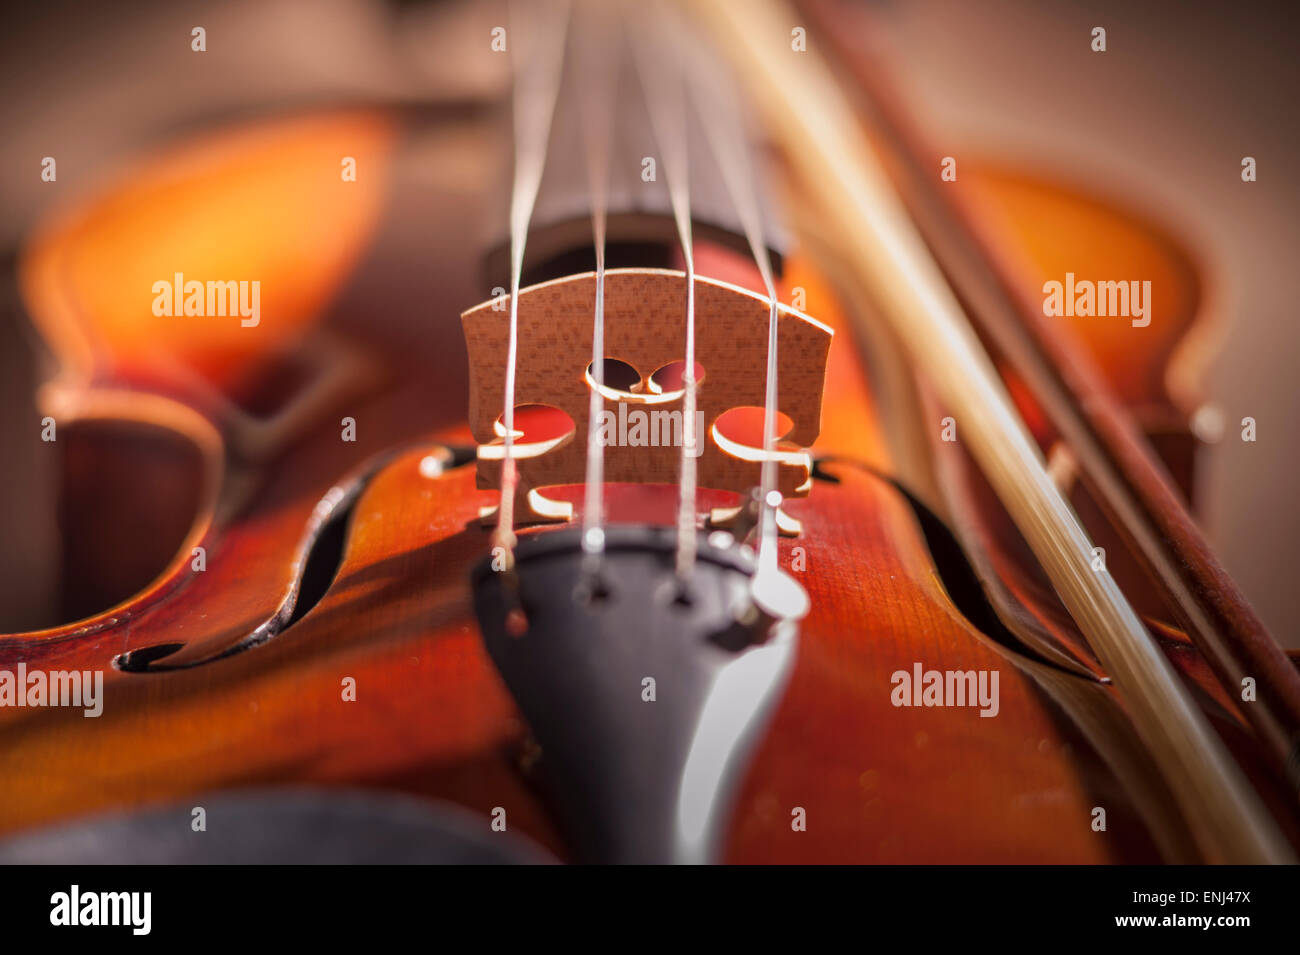 Violin bridge with very limited depth of field Stock Photo